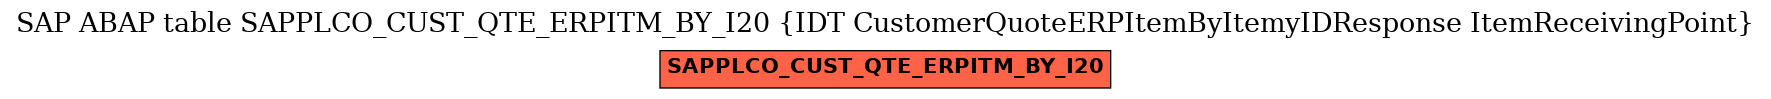 E-R Diagram for table SAPPLCO_CUST_QTE_ERPITM_BY_I20 (IDT CustomerQuoteERPItemByItemyIDResponse ItemReceivingPoint)